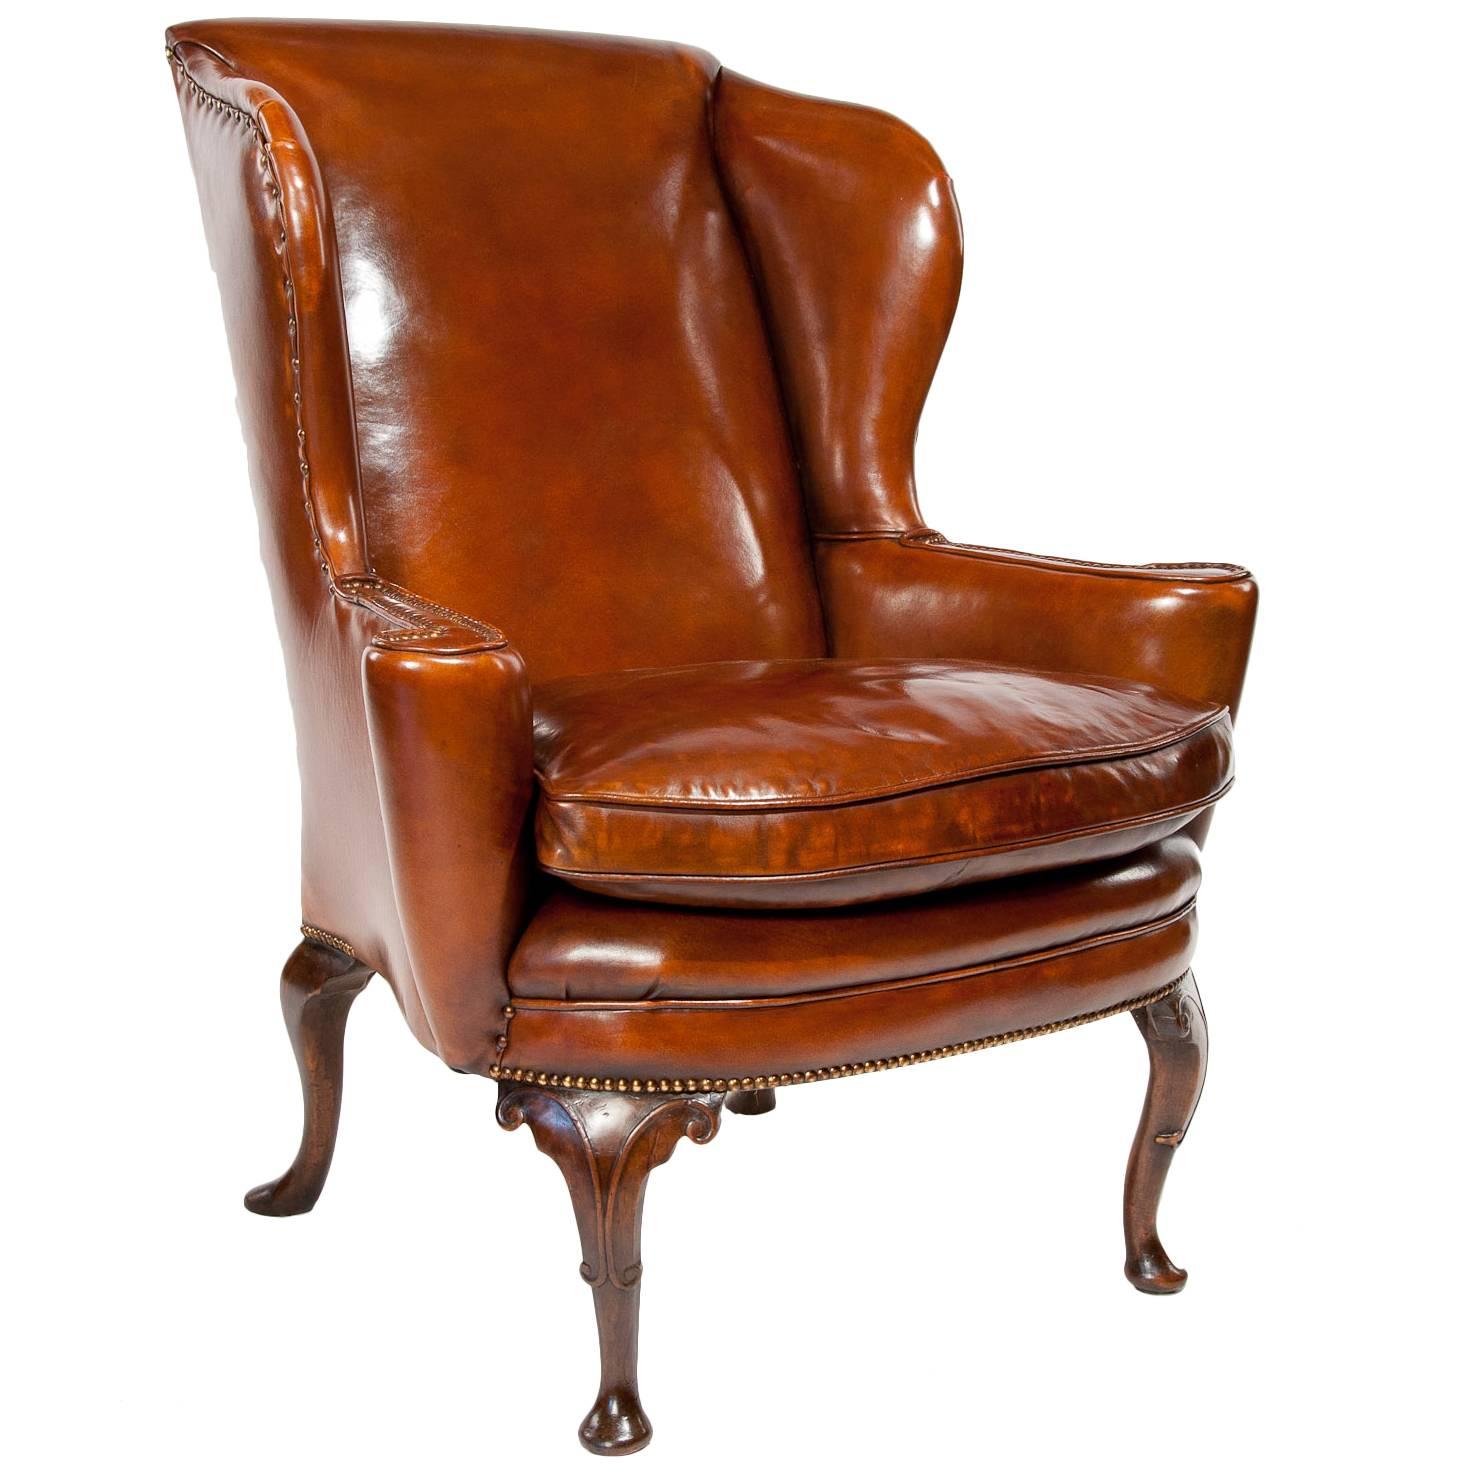 Superb Quality 19th Century Antique Leather Wing Chair